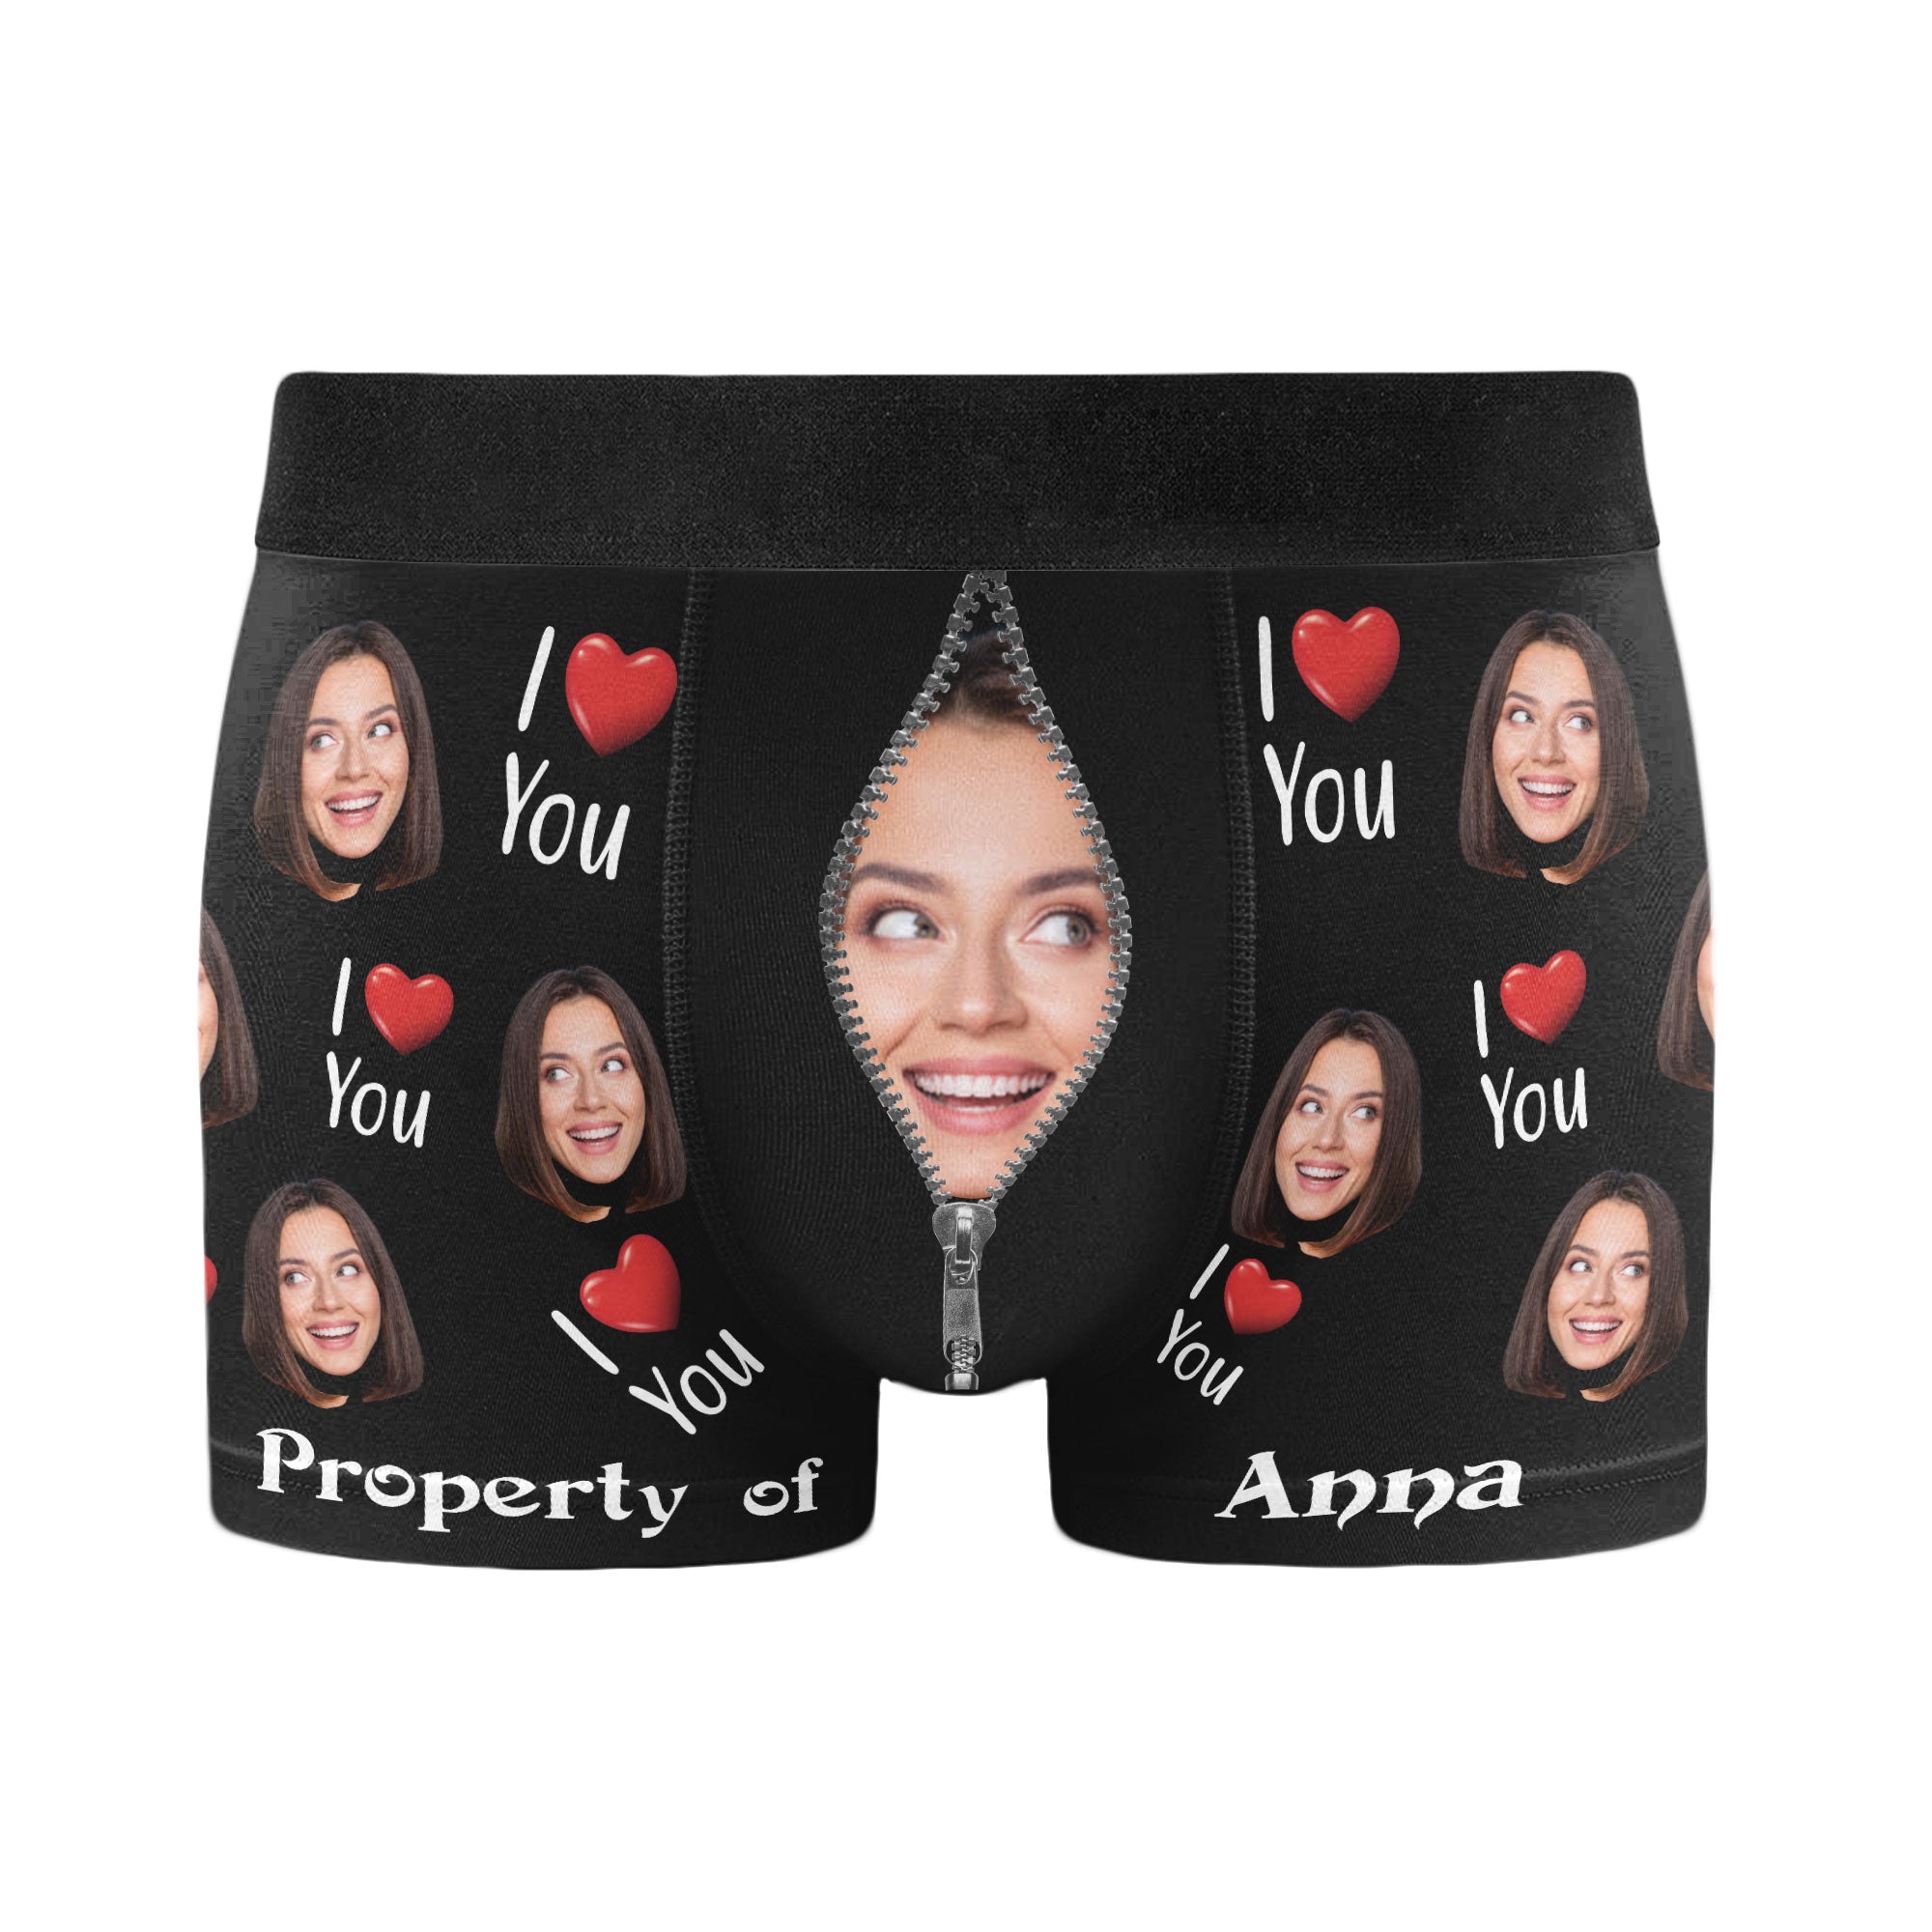 Image of (Photo Inserted) Property Of Girlfriends - Personalized Men's Boxer Briefs - Valentine's Day, Loving, Birthday Gift For Boyfriend, Husband, Life Partners 4 o a 4 Pr Qperty of 